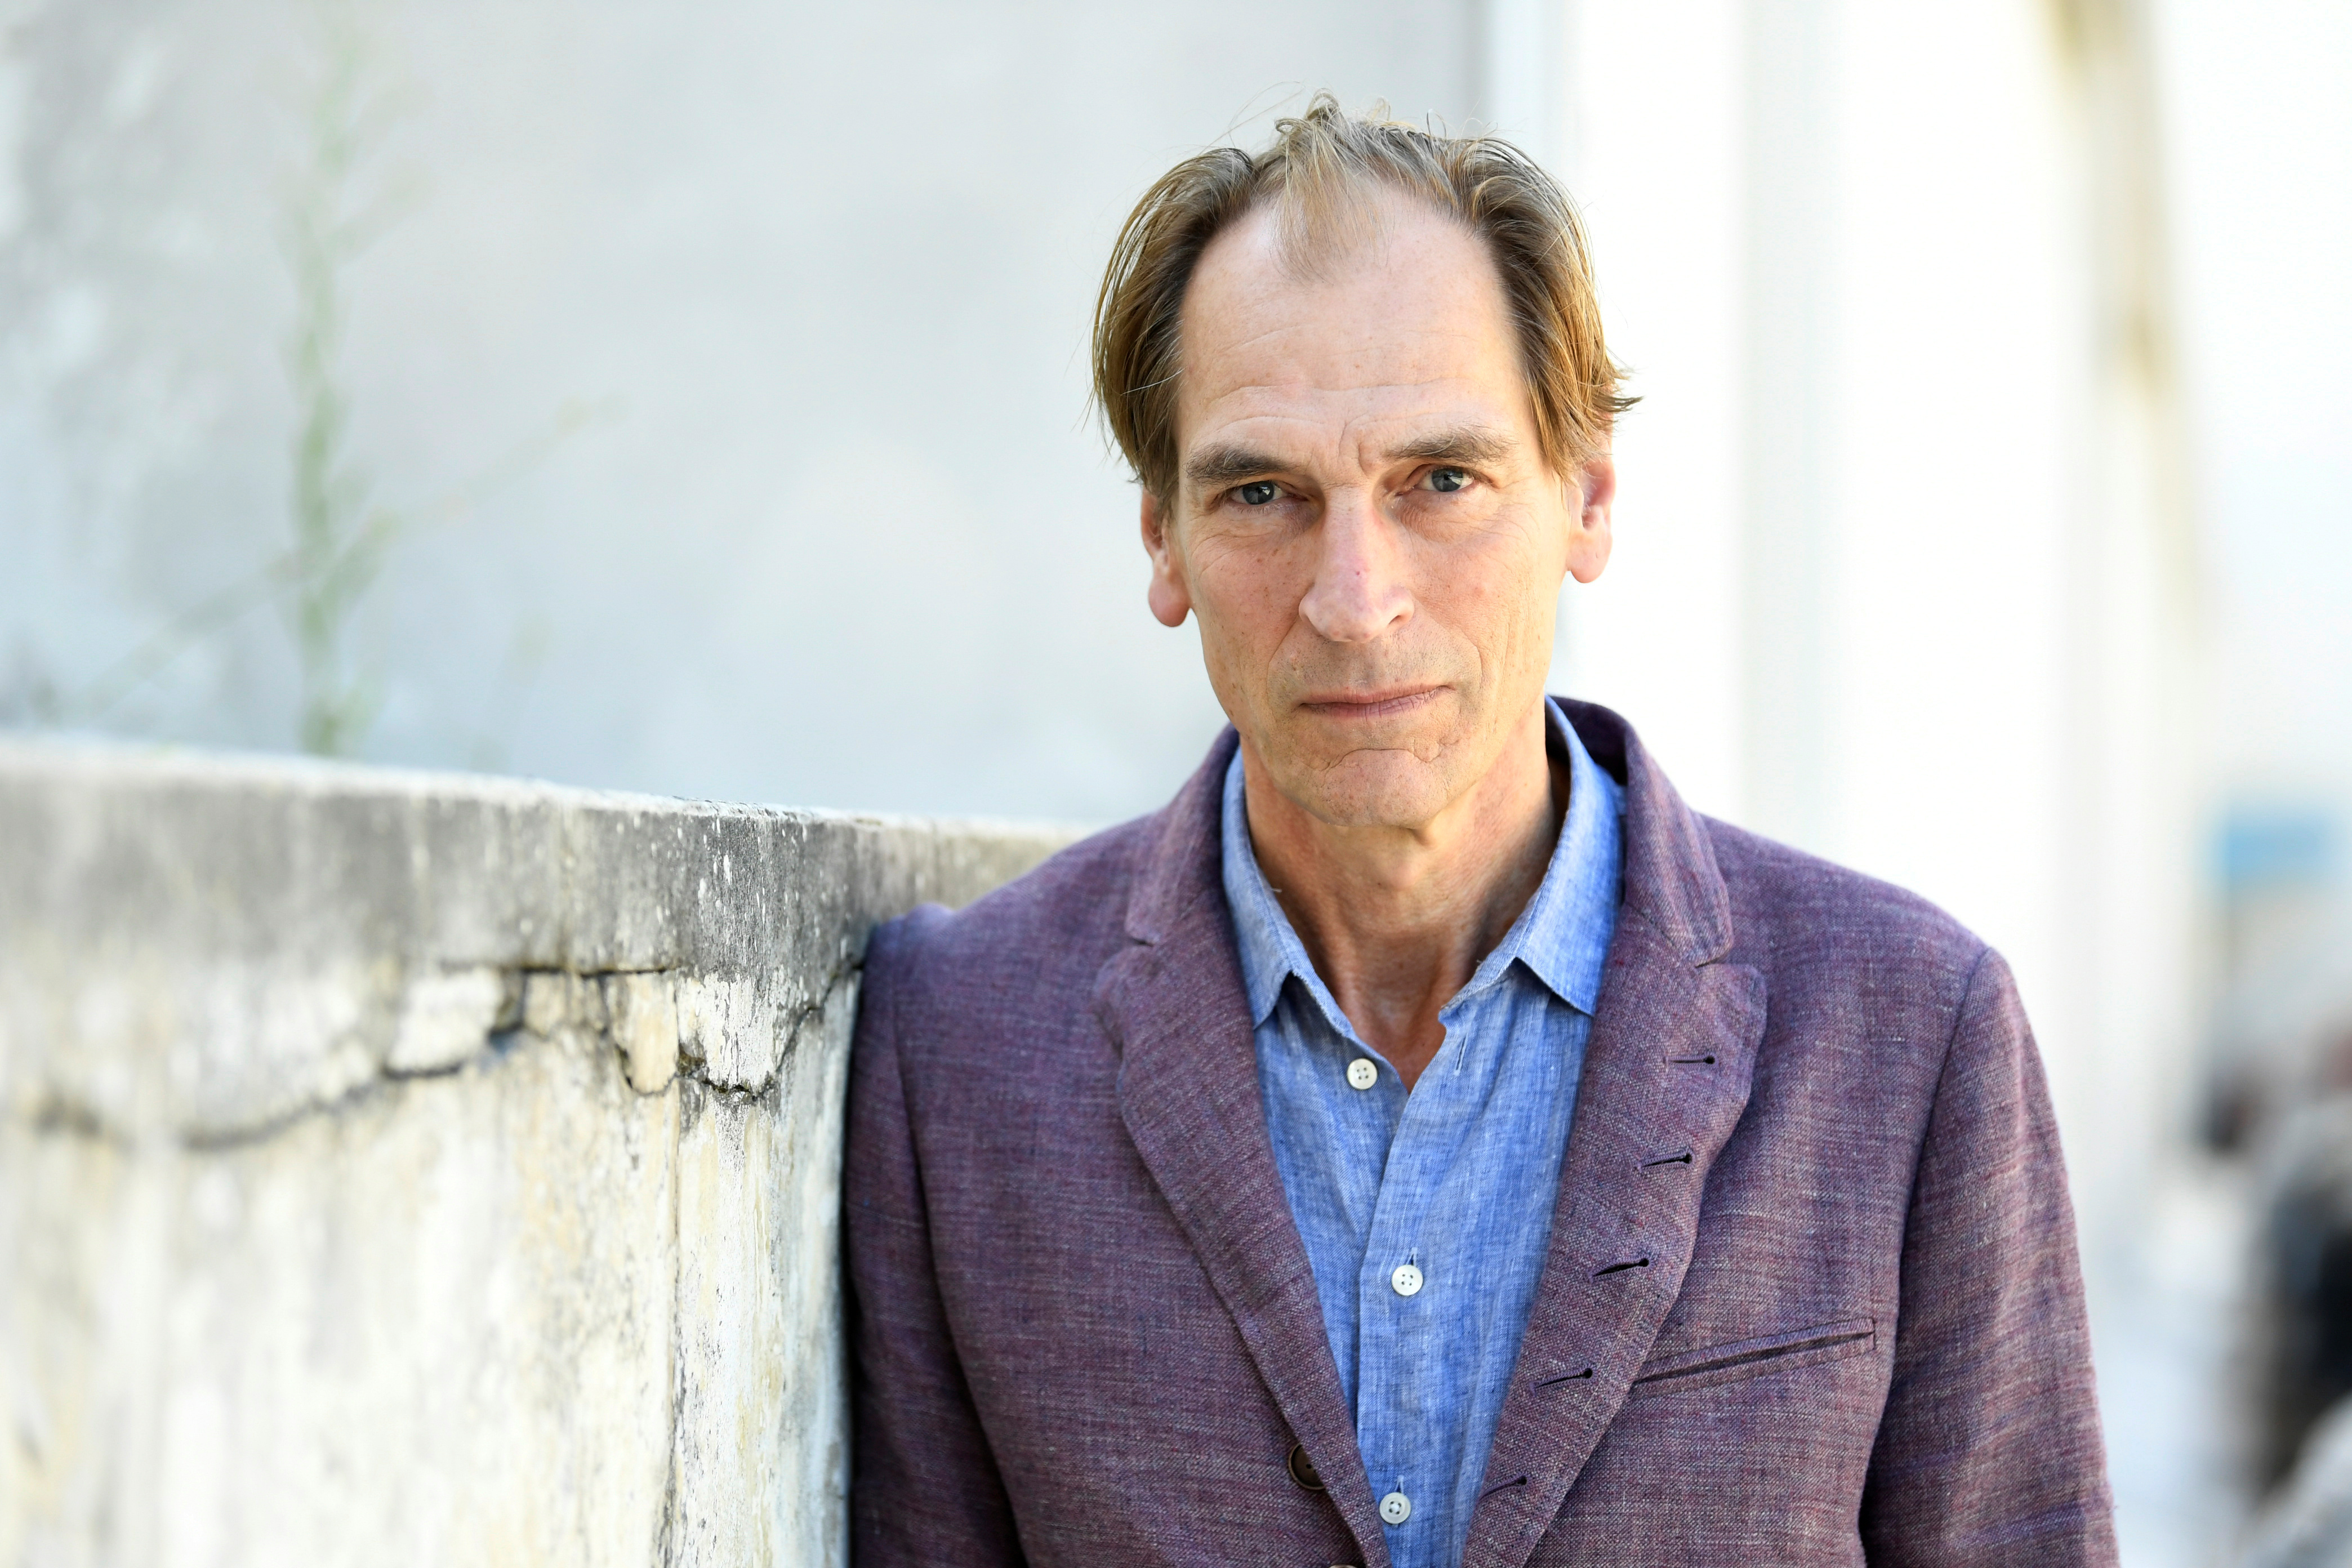 Julian Sands dead: Actor's remains found near SoCal's Mount Baldy